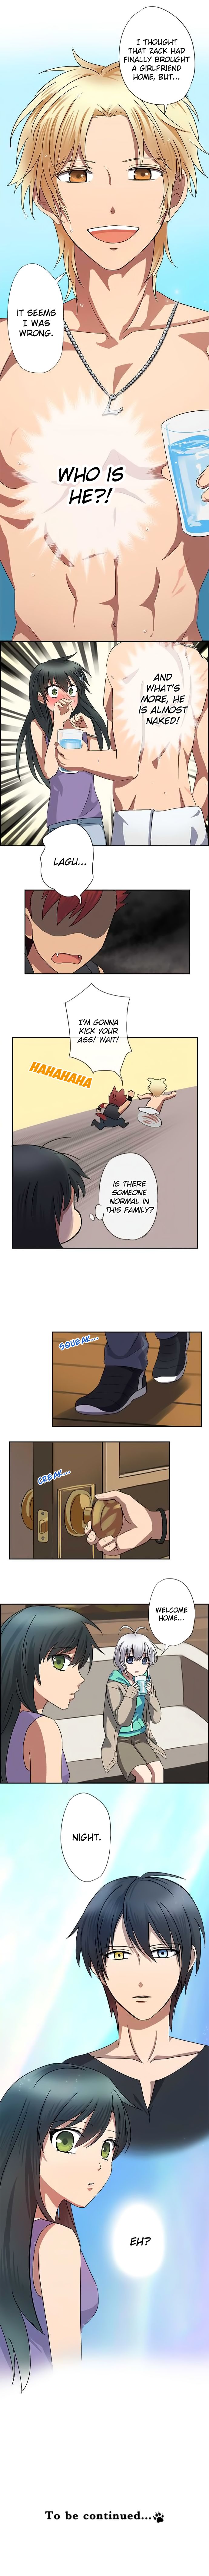 Distancia ~ The Untouchable One ~ - Page 3